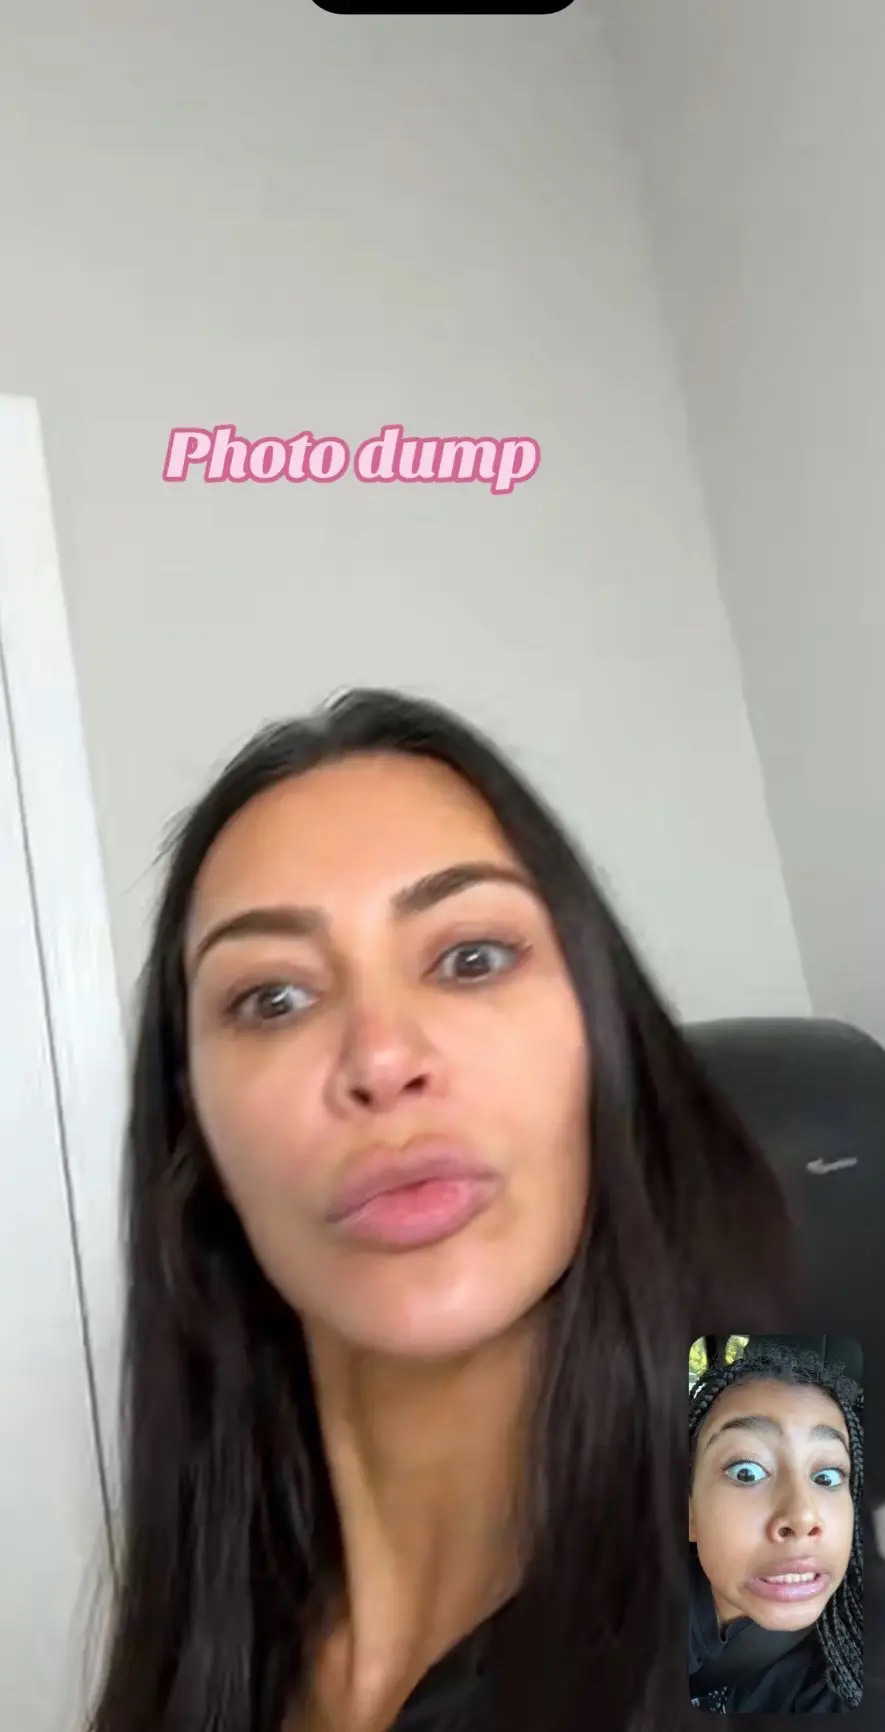 North shared an unflattering snapshot of Kim in a social media video